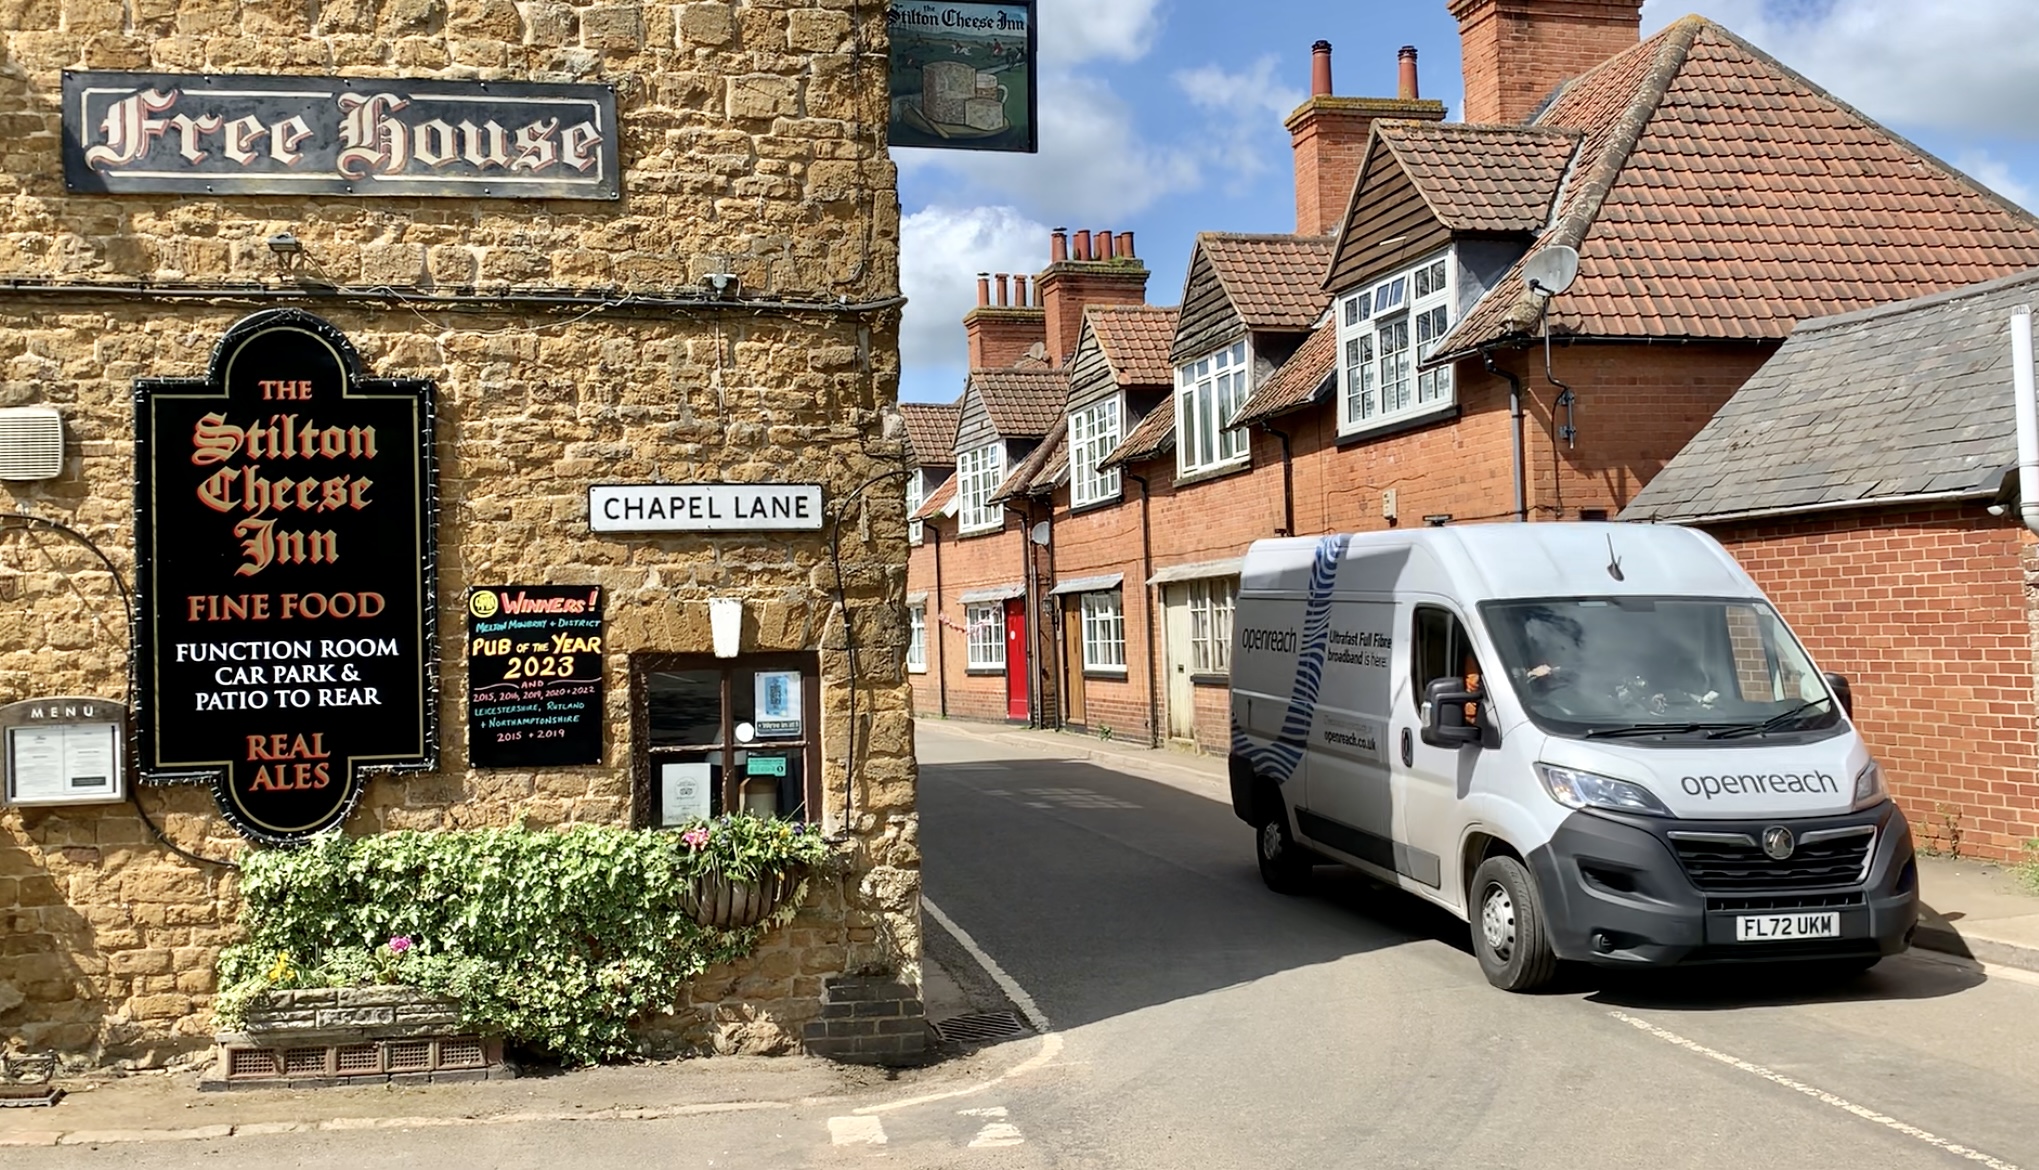 An Openreach van is next to a pub in Somerby village, Leicestershire.